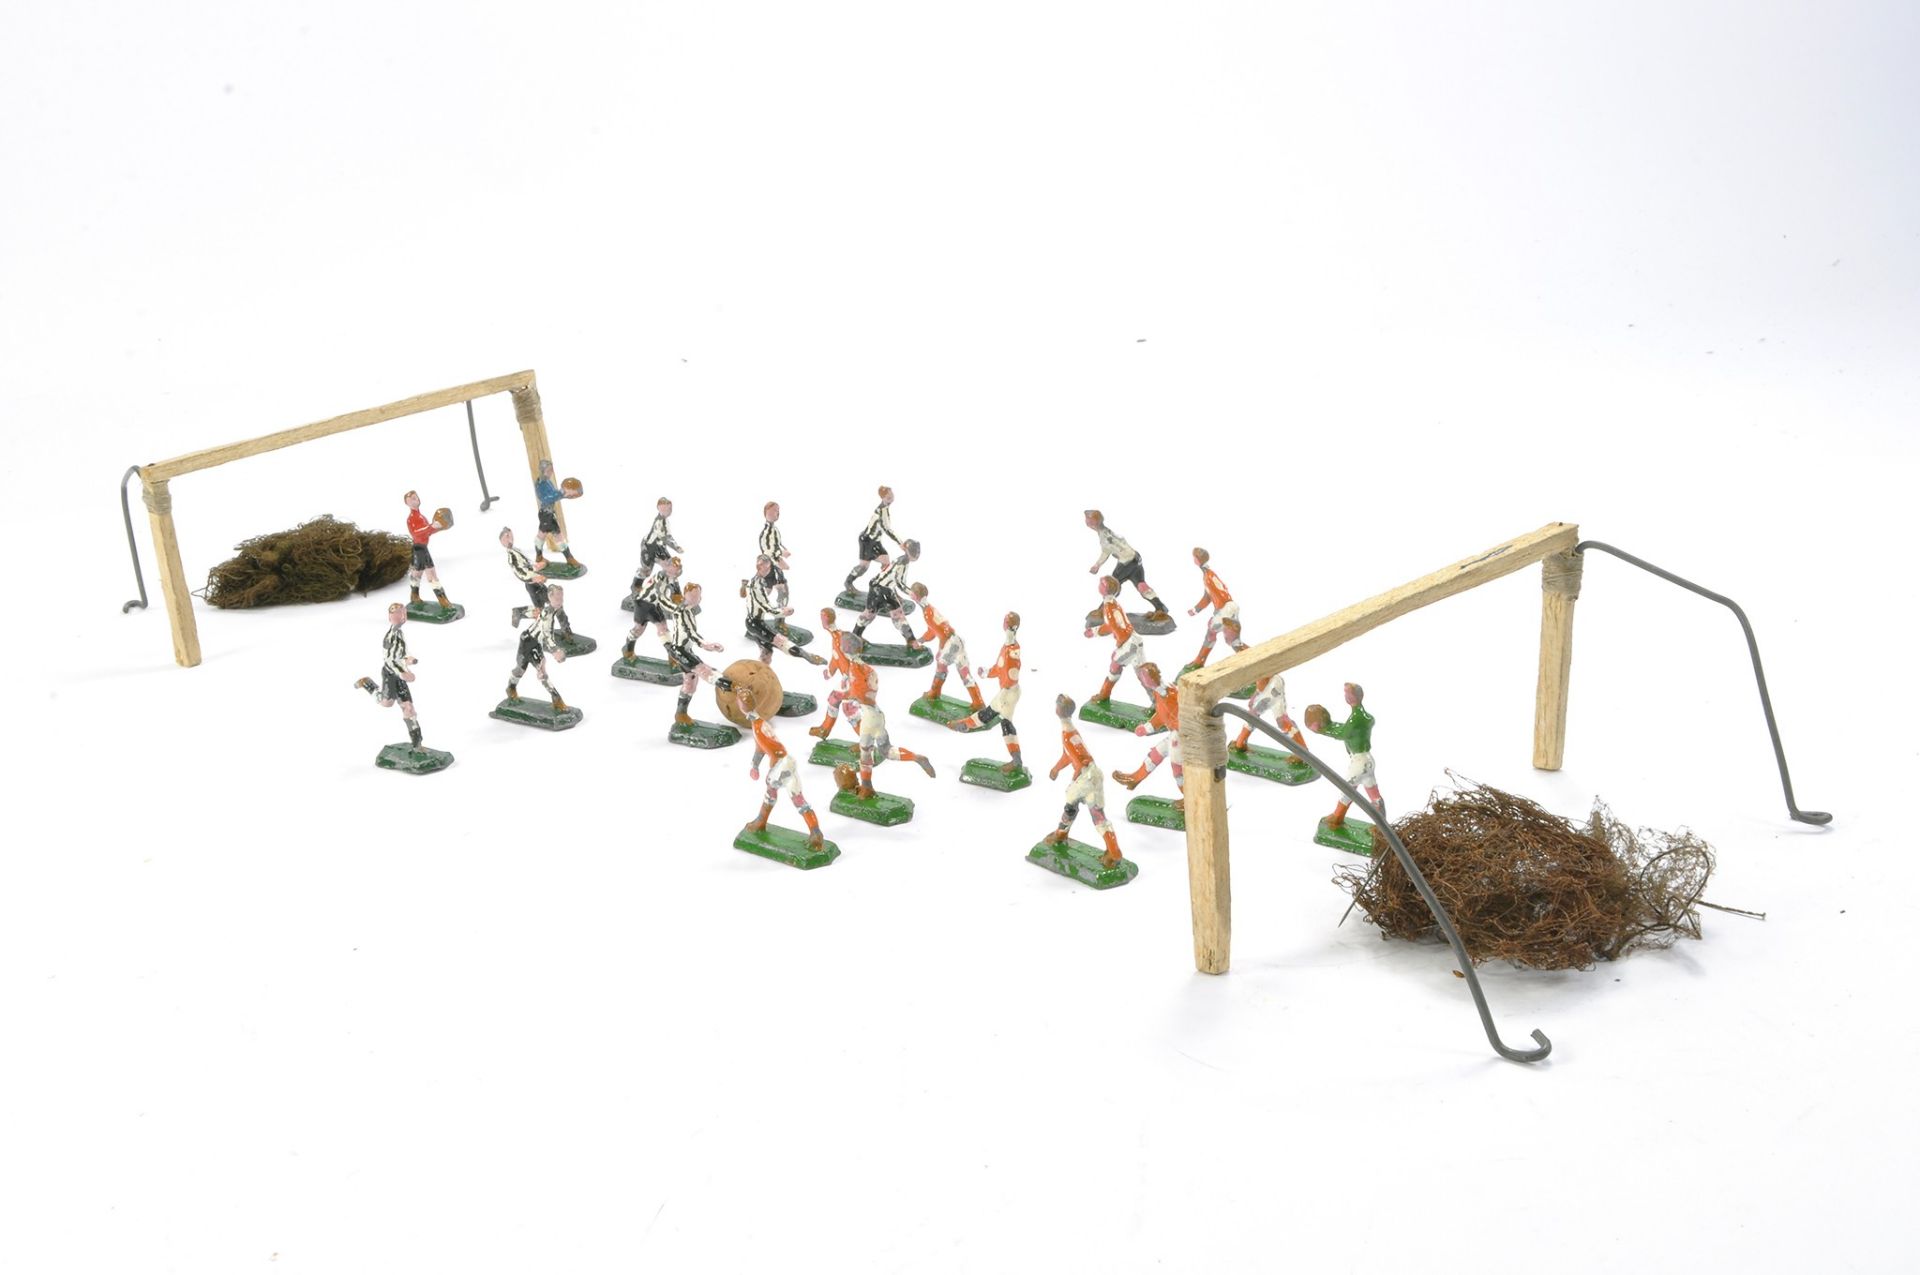 Unusual Lead Metal Football - Soccer Figures likely from a vintage game as shown. Maker unknown.